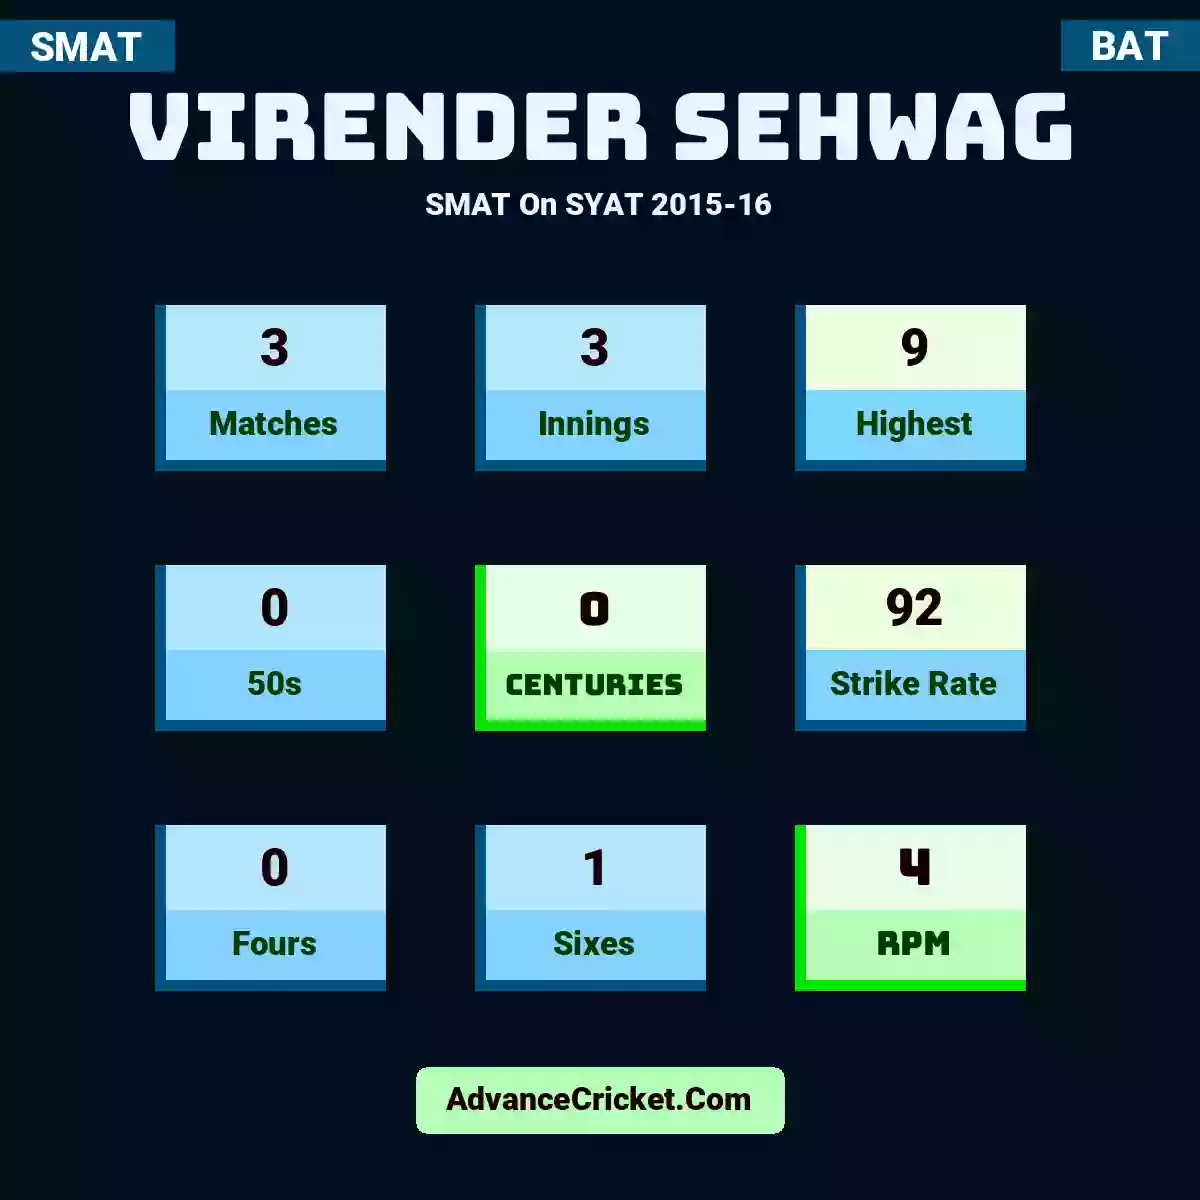 Virender Sehwag SMAT  On SYAT 2015-16, Virender Sehwag played 3 matches, scored 9 runs as highest, 0 half-centuries, and 0 centuries, with a strike rate of 92. V.Sehwag hit 0 fours and 1 sixes, with an RPM of 4.